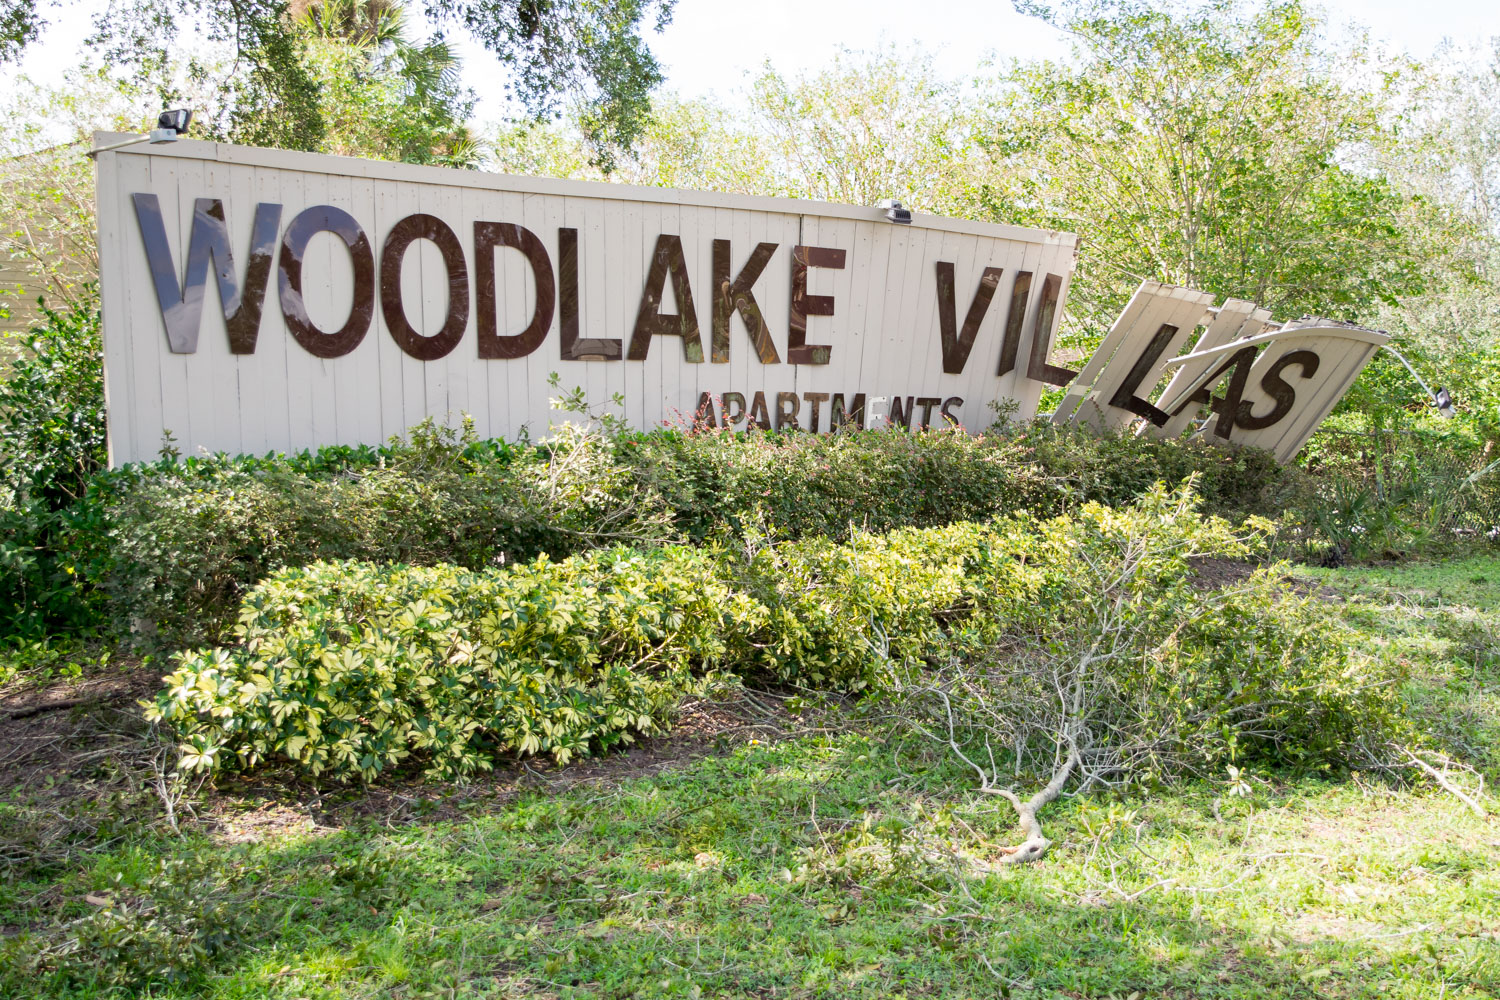 A sign for the Woodlake Villas leans damaged by the Hurricane. Some areas in the city received downed trees and power lines, while others faced little or no problems. Ryan Lynch | Business Manager